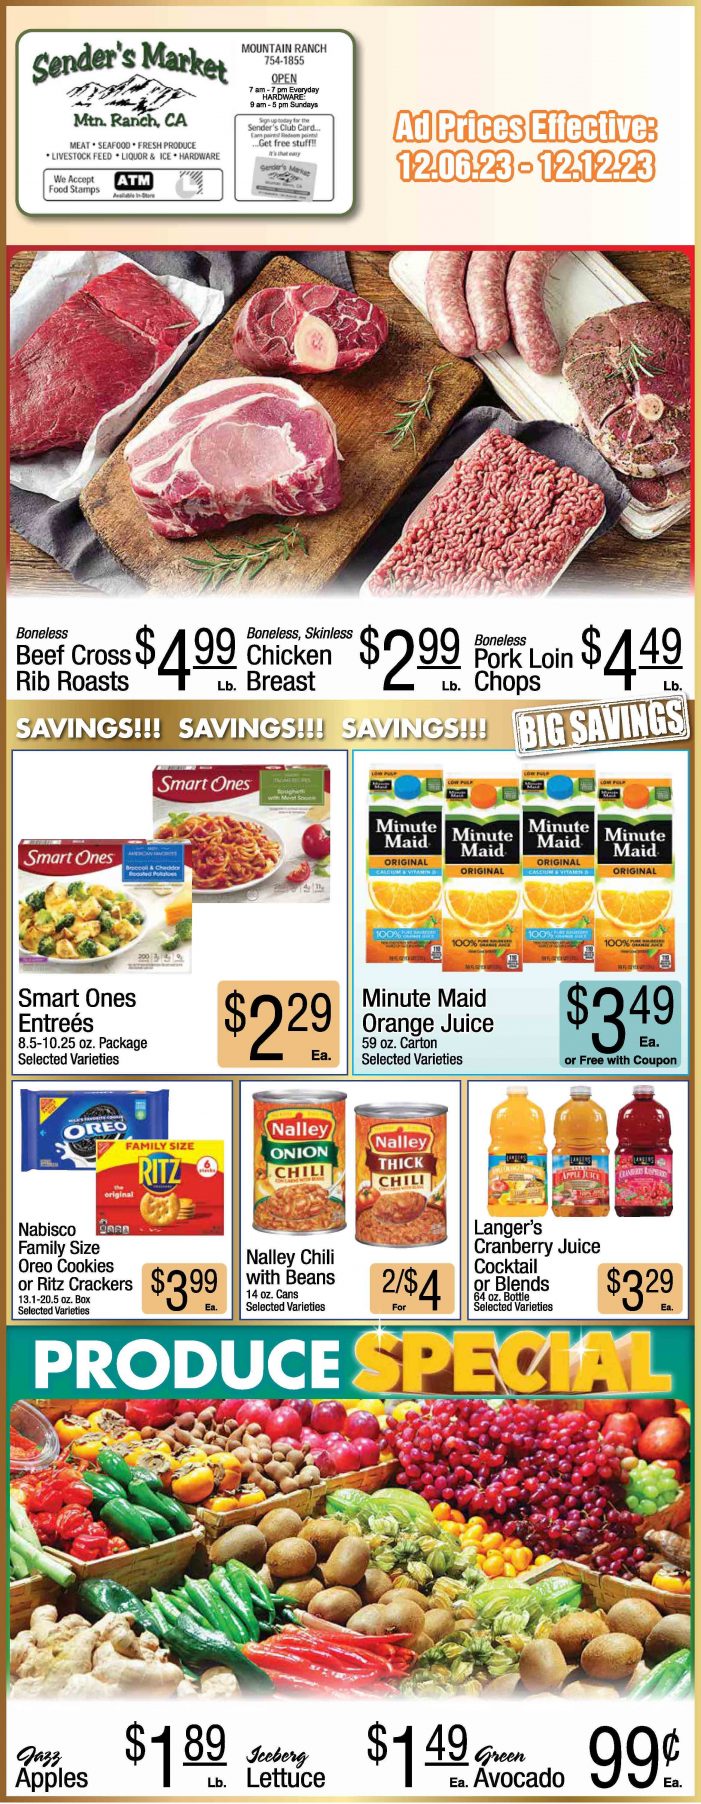 Sender’s Market Weekly Ad & Grocery Specials Through December 12th! Shop Local & Save!!